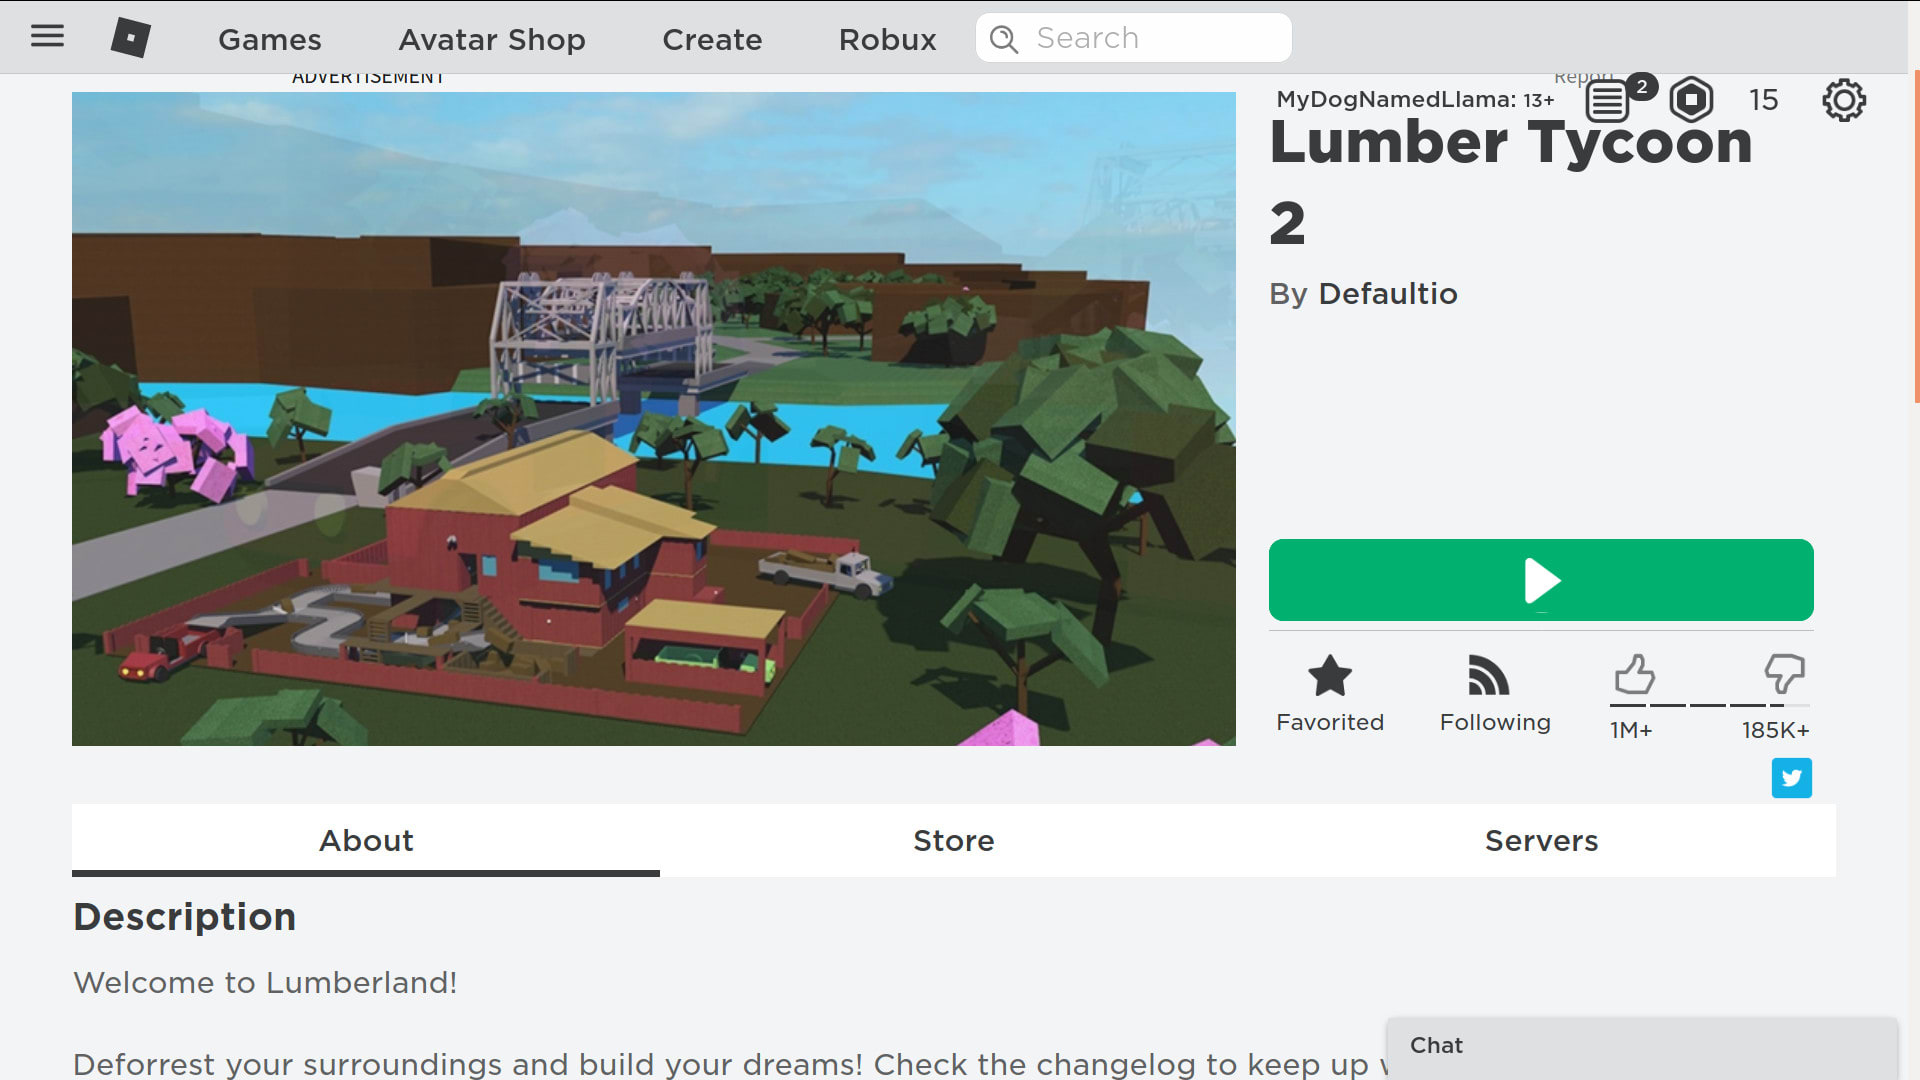 Join Your Roblox Lumbertycoon2 Server And Give You An Alpha Axe By Floofball 142 - roblox create server